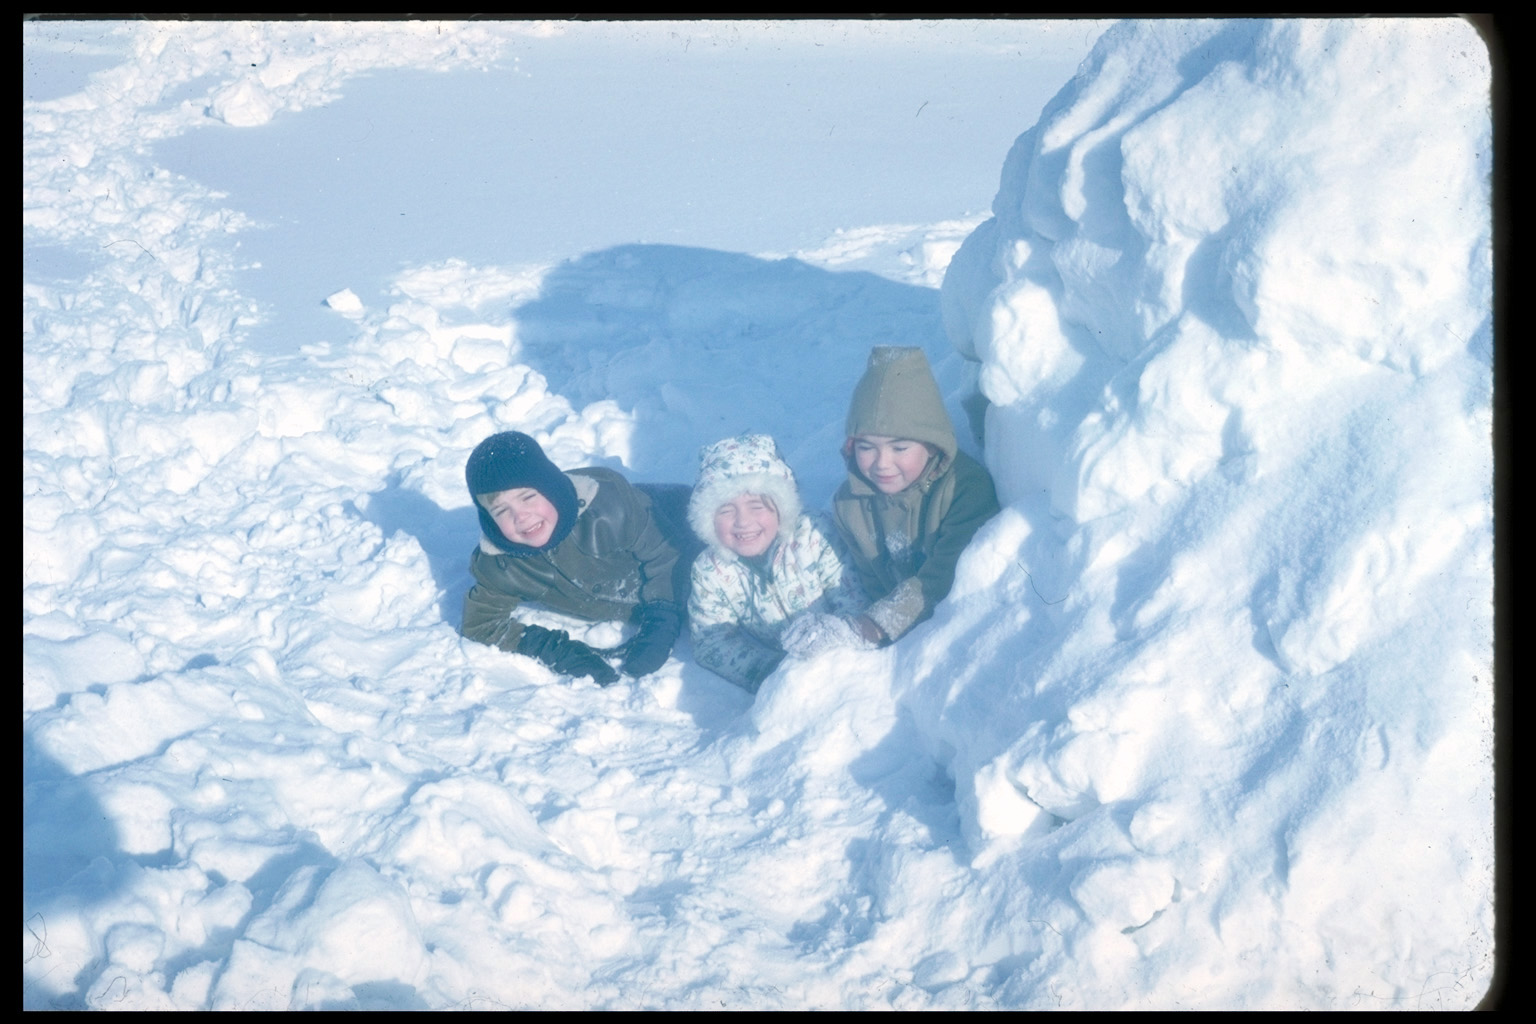 One of many snow caves in Clarence, NY